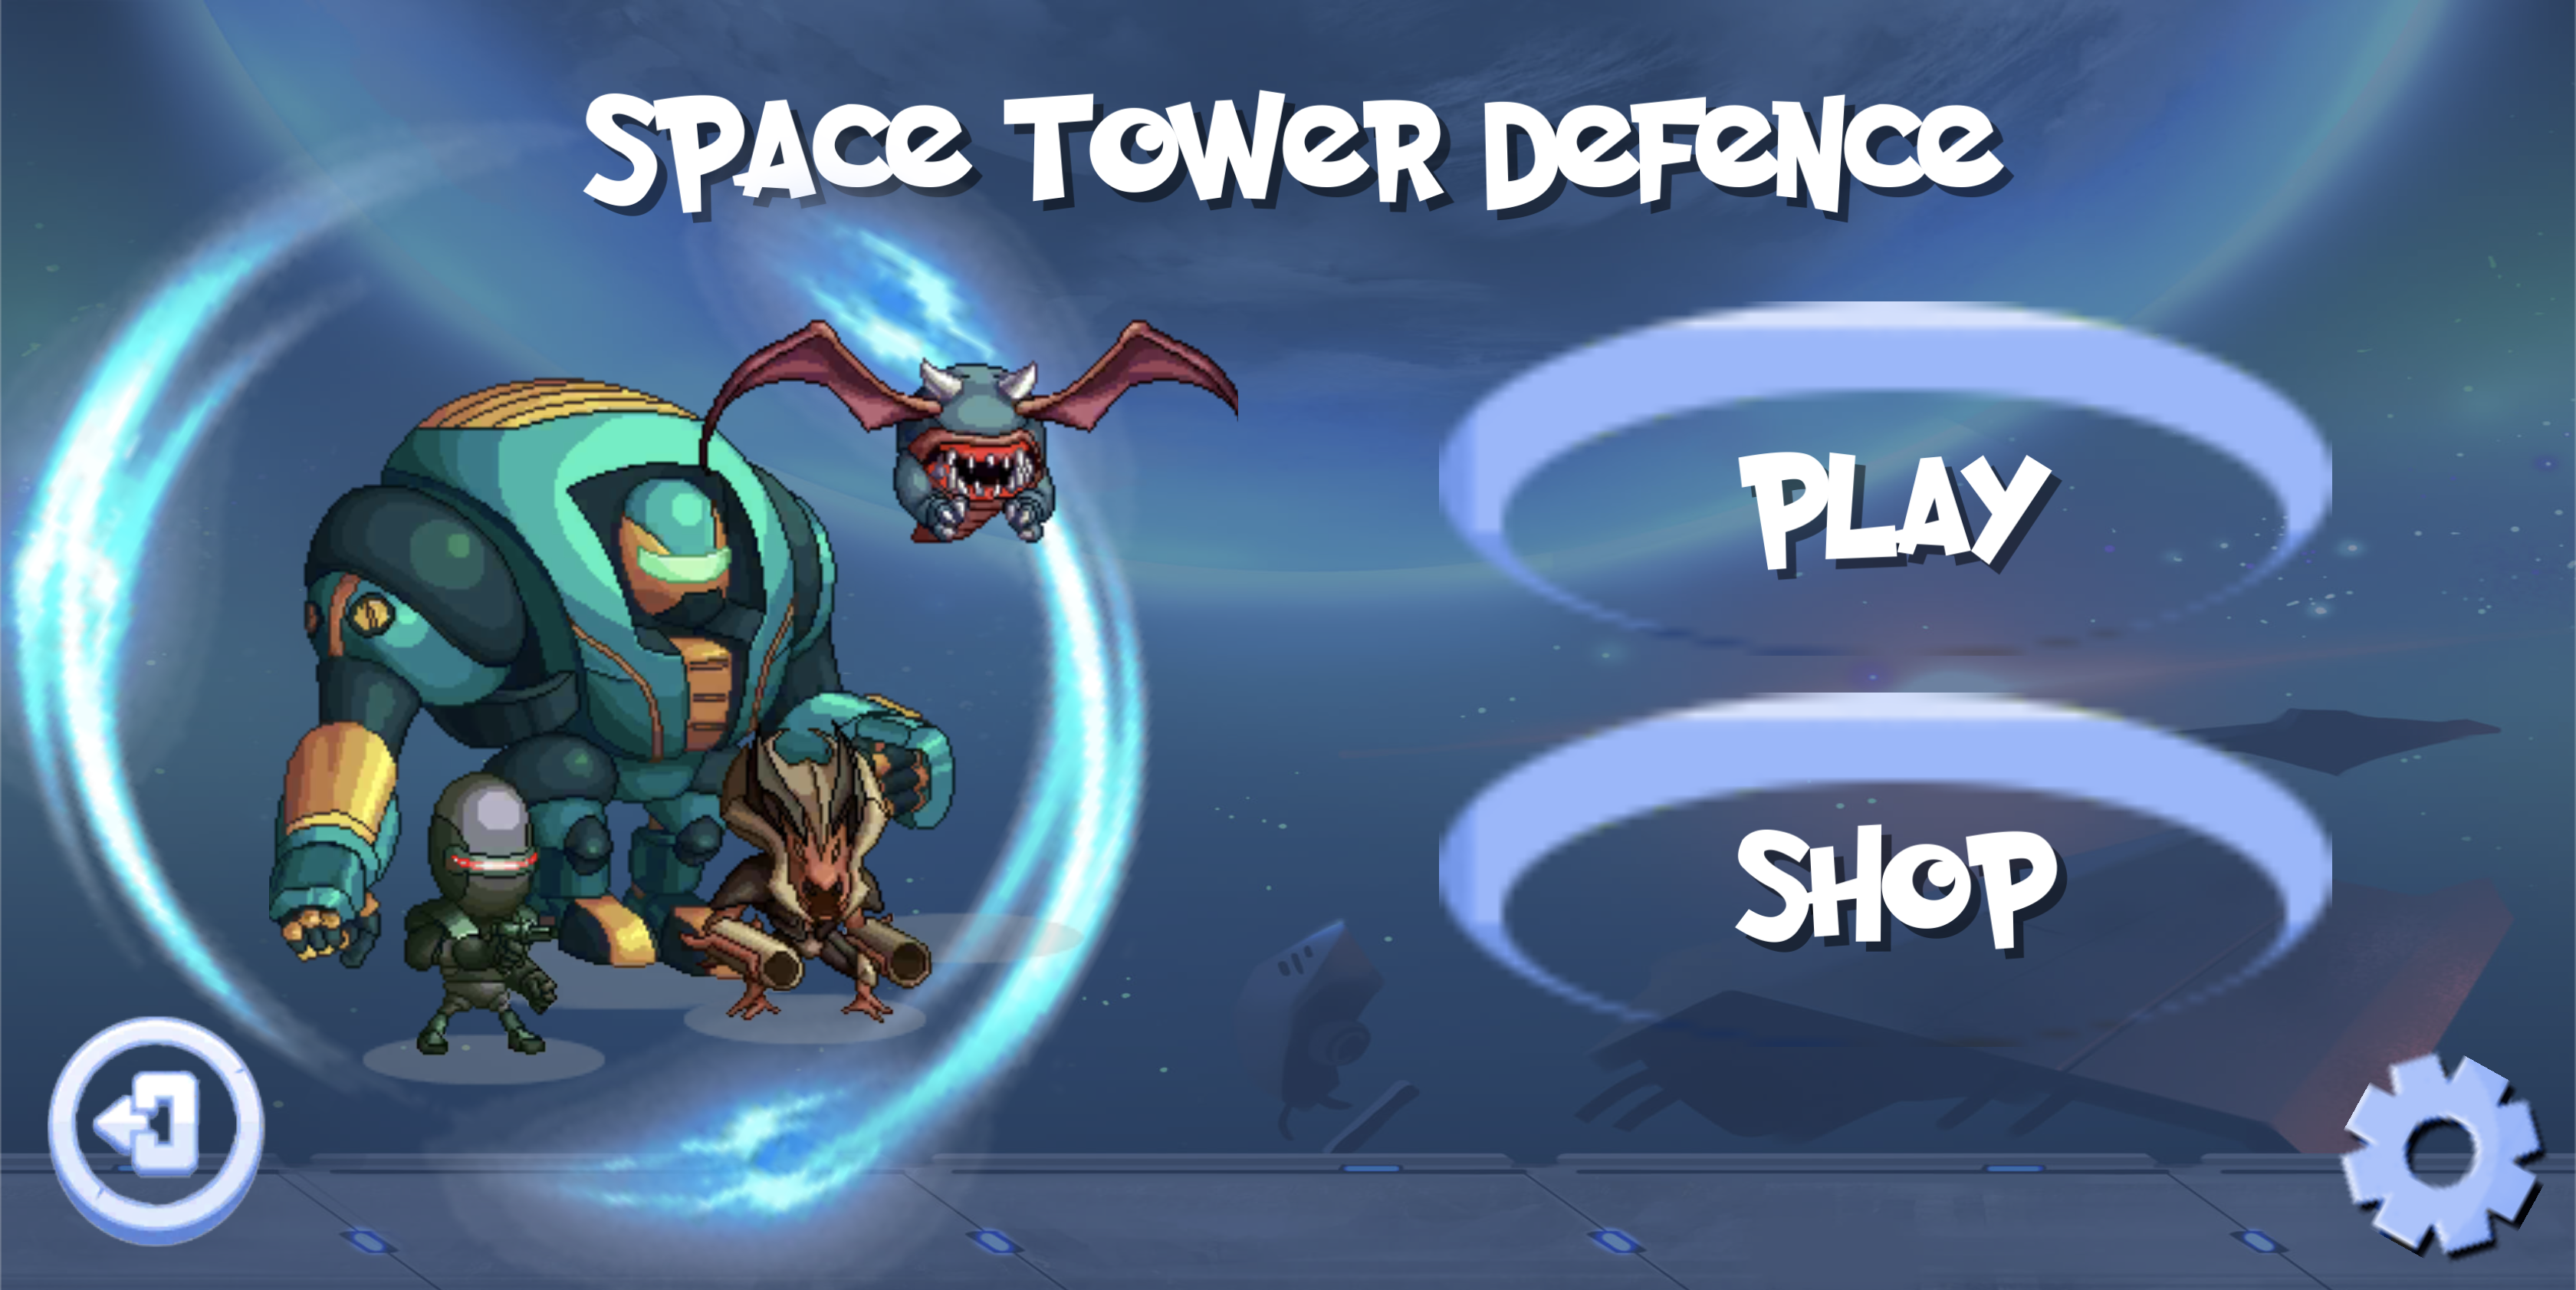 Total Defence Tower Defence Game lets you defend Singapore against